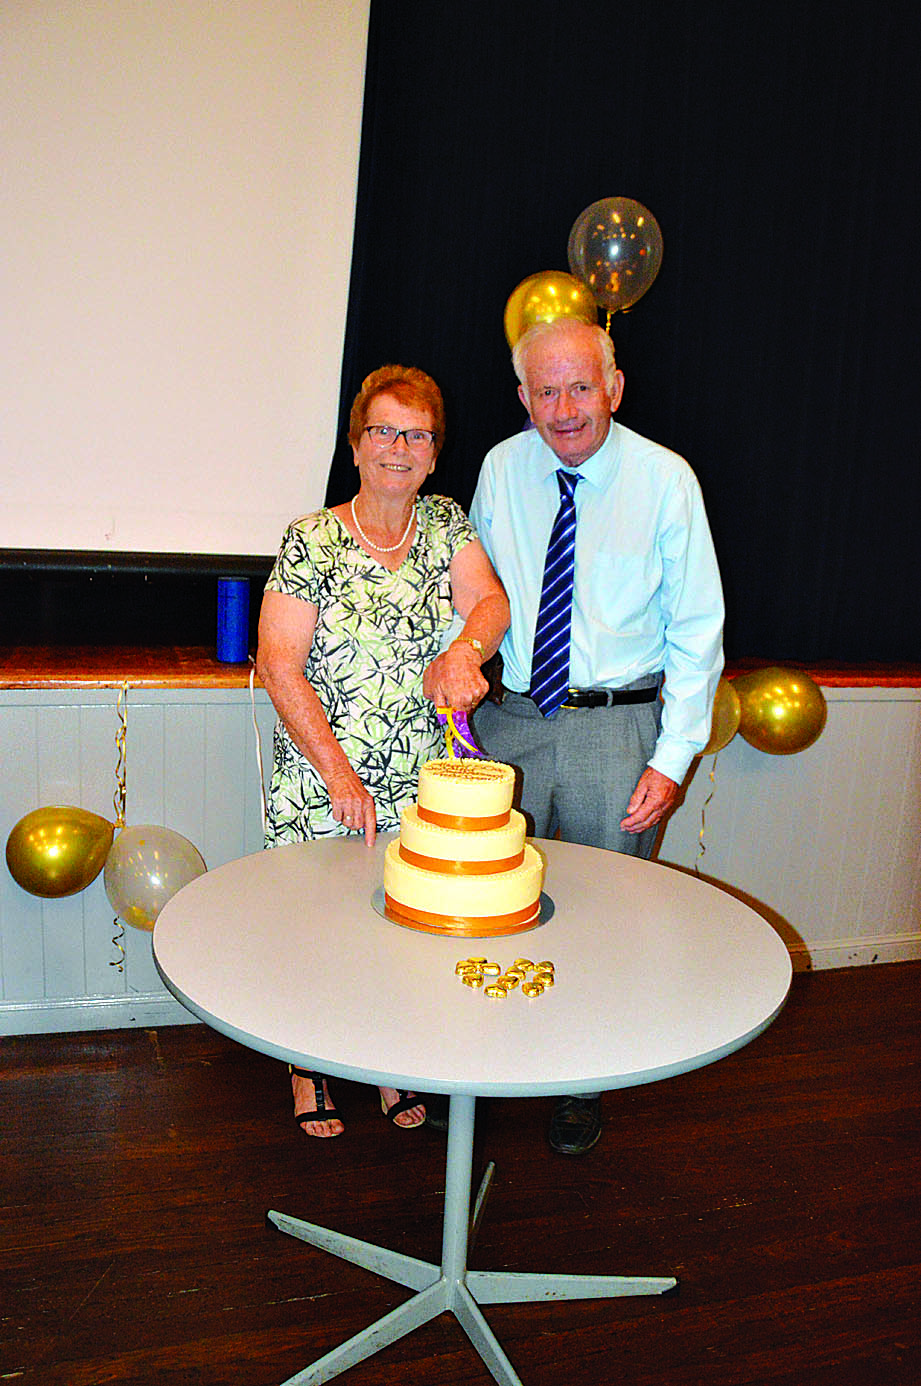 Irene and Fred with their golden wedding anniversary cake.